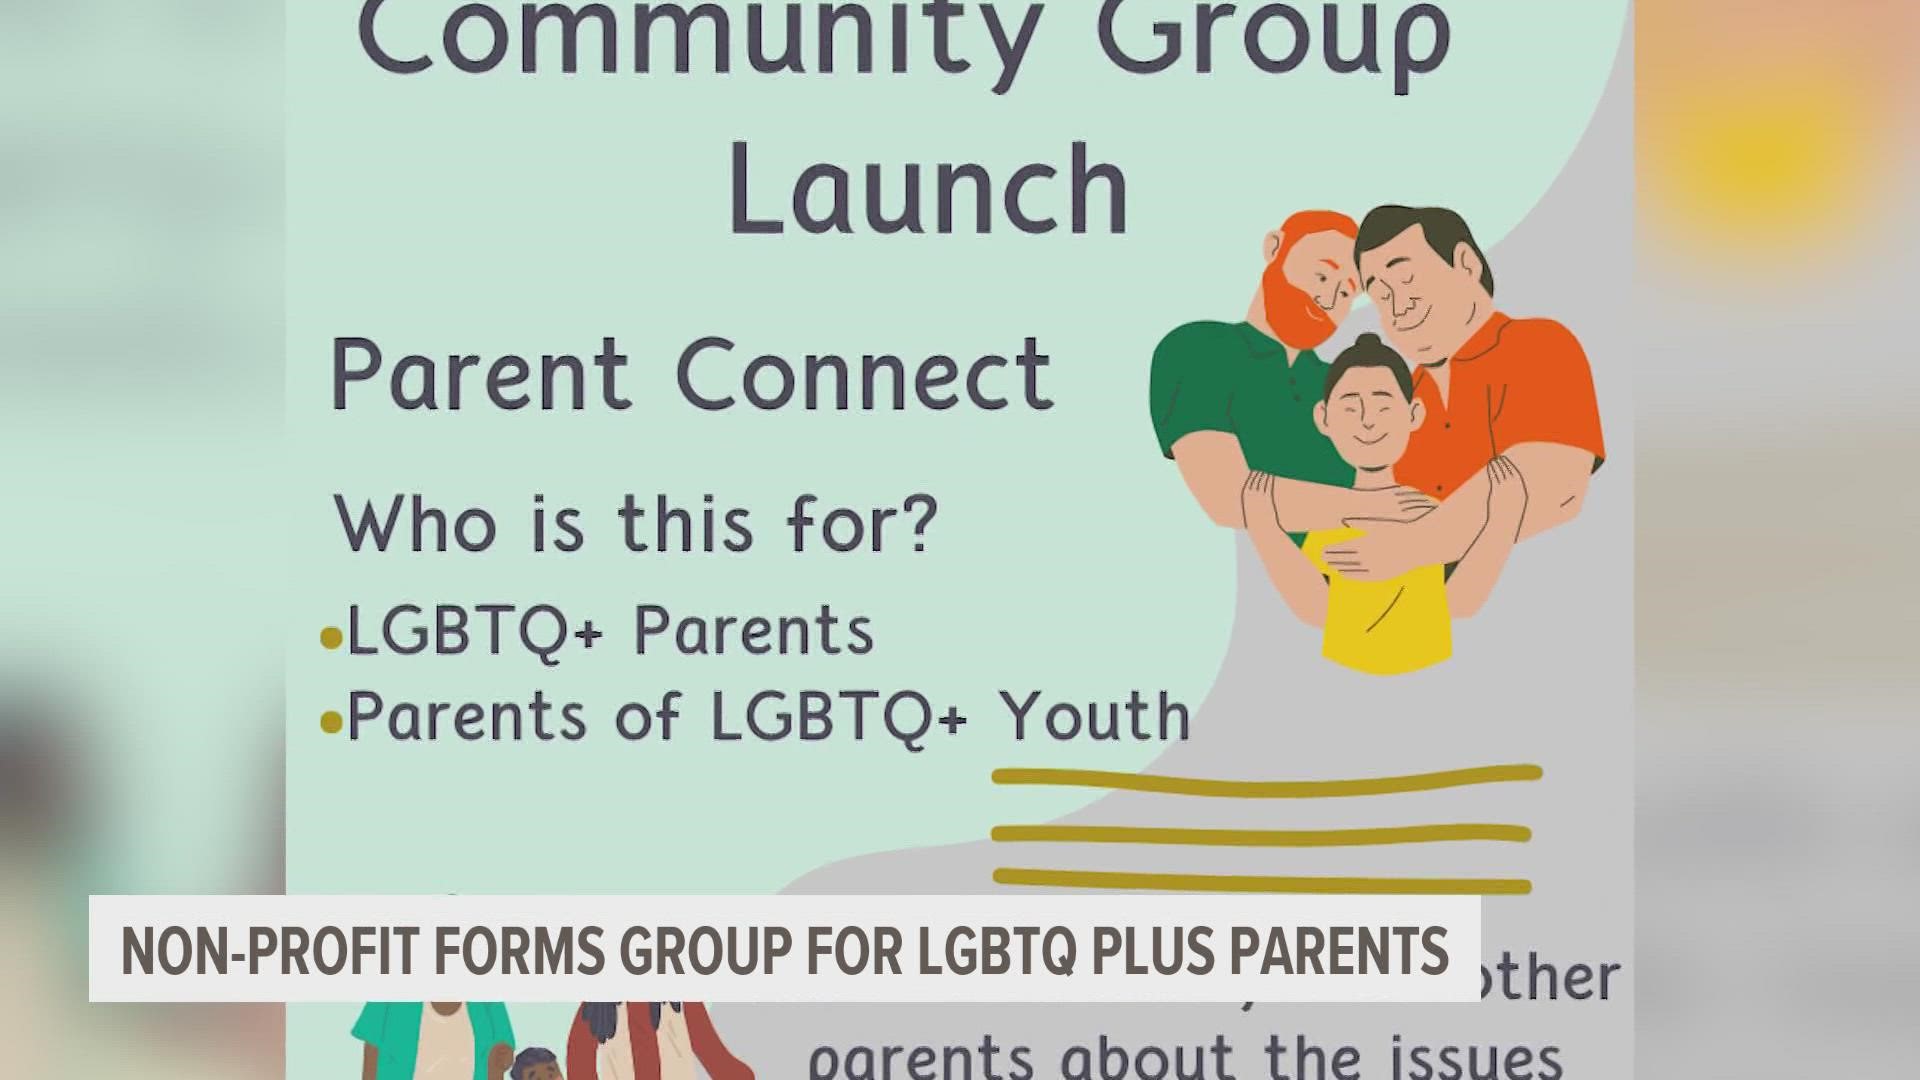 A nonprofit group is working to make the metro more inclusive by creating a parent support group for LGBTQ+ parents, and parents with LGBTQ+ youth.